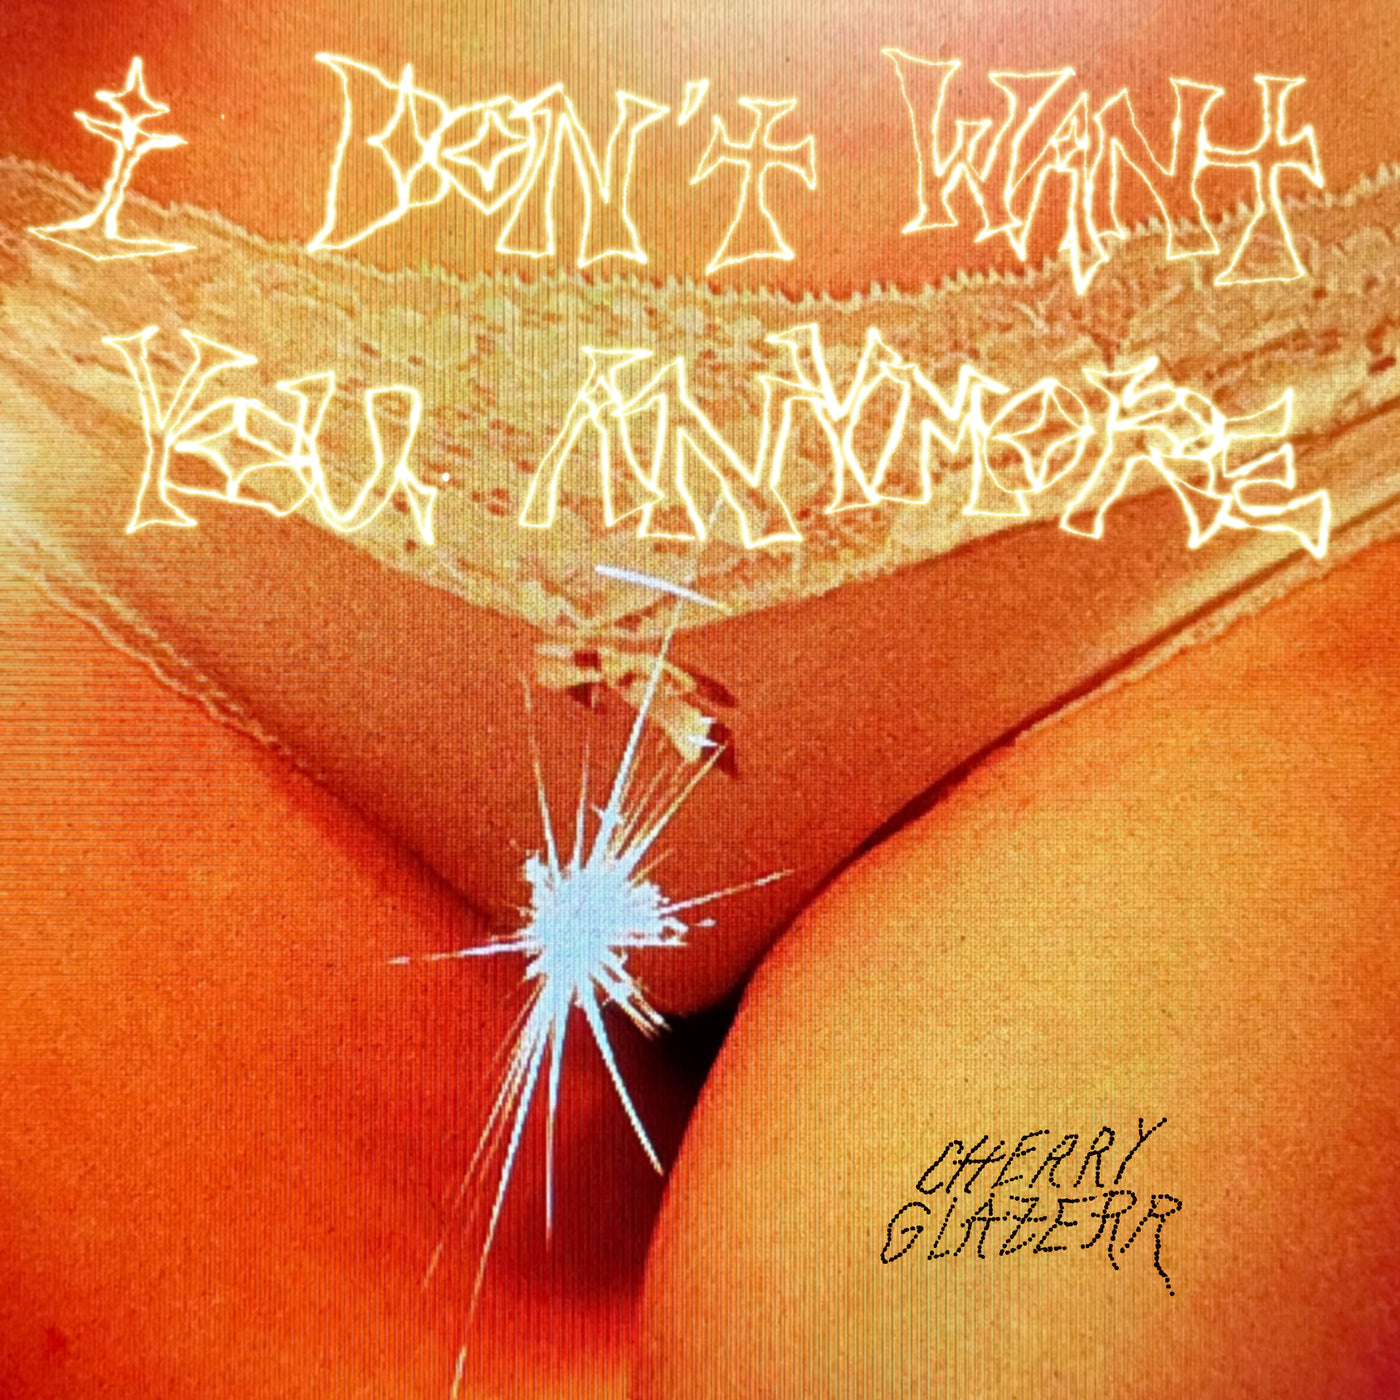 Cherry Glazerr - I Don't Want You Anymore [Crystal Clear Vinyl LP]